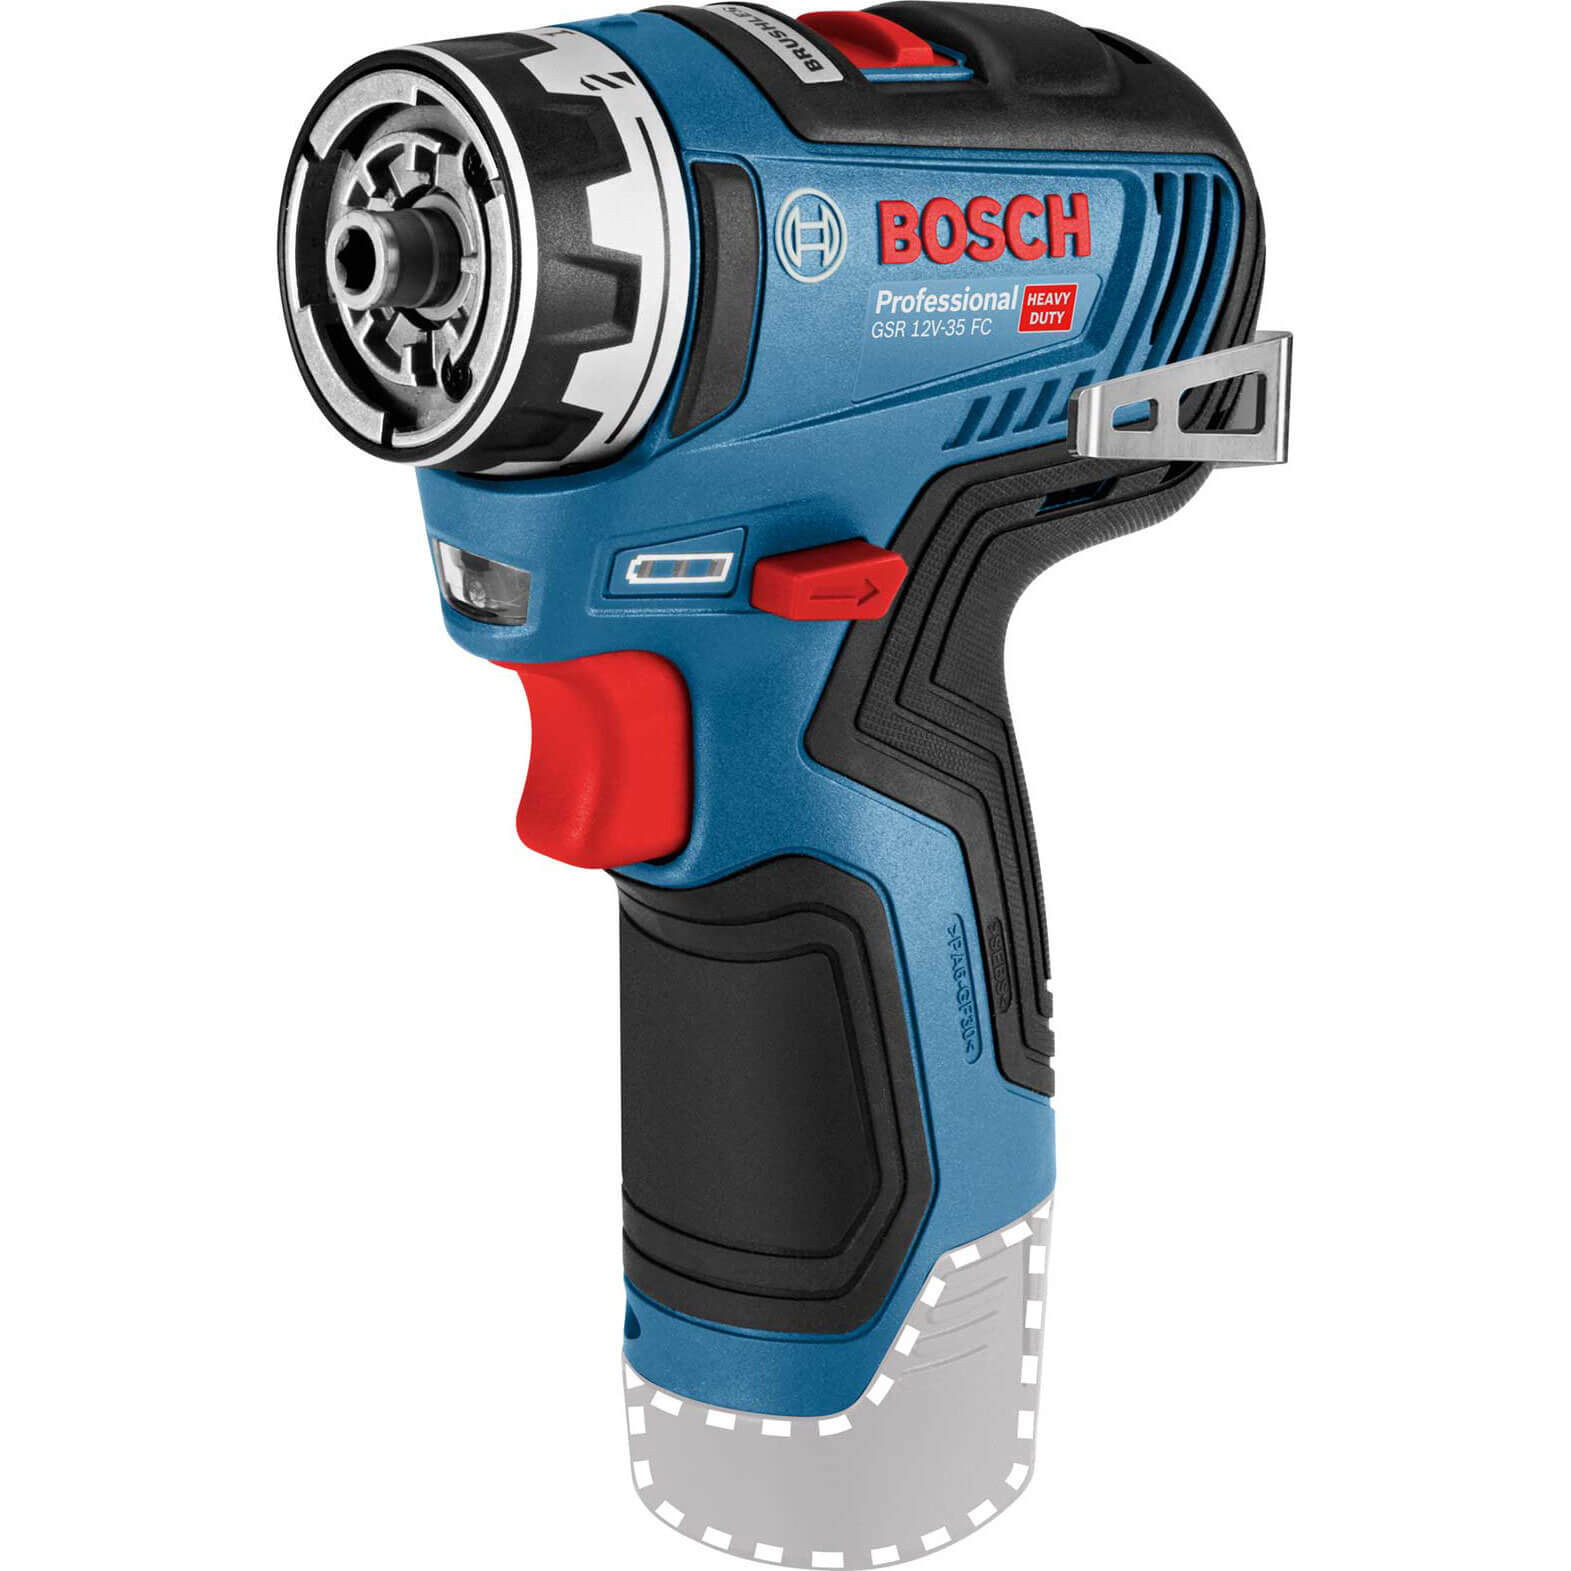 Photo of Bosch Gsr 12v-35 Fc 12v Cordless Brushless Drill Driver No Batteries No Charger No Case